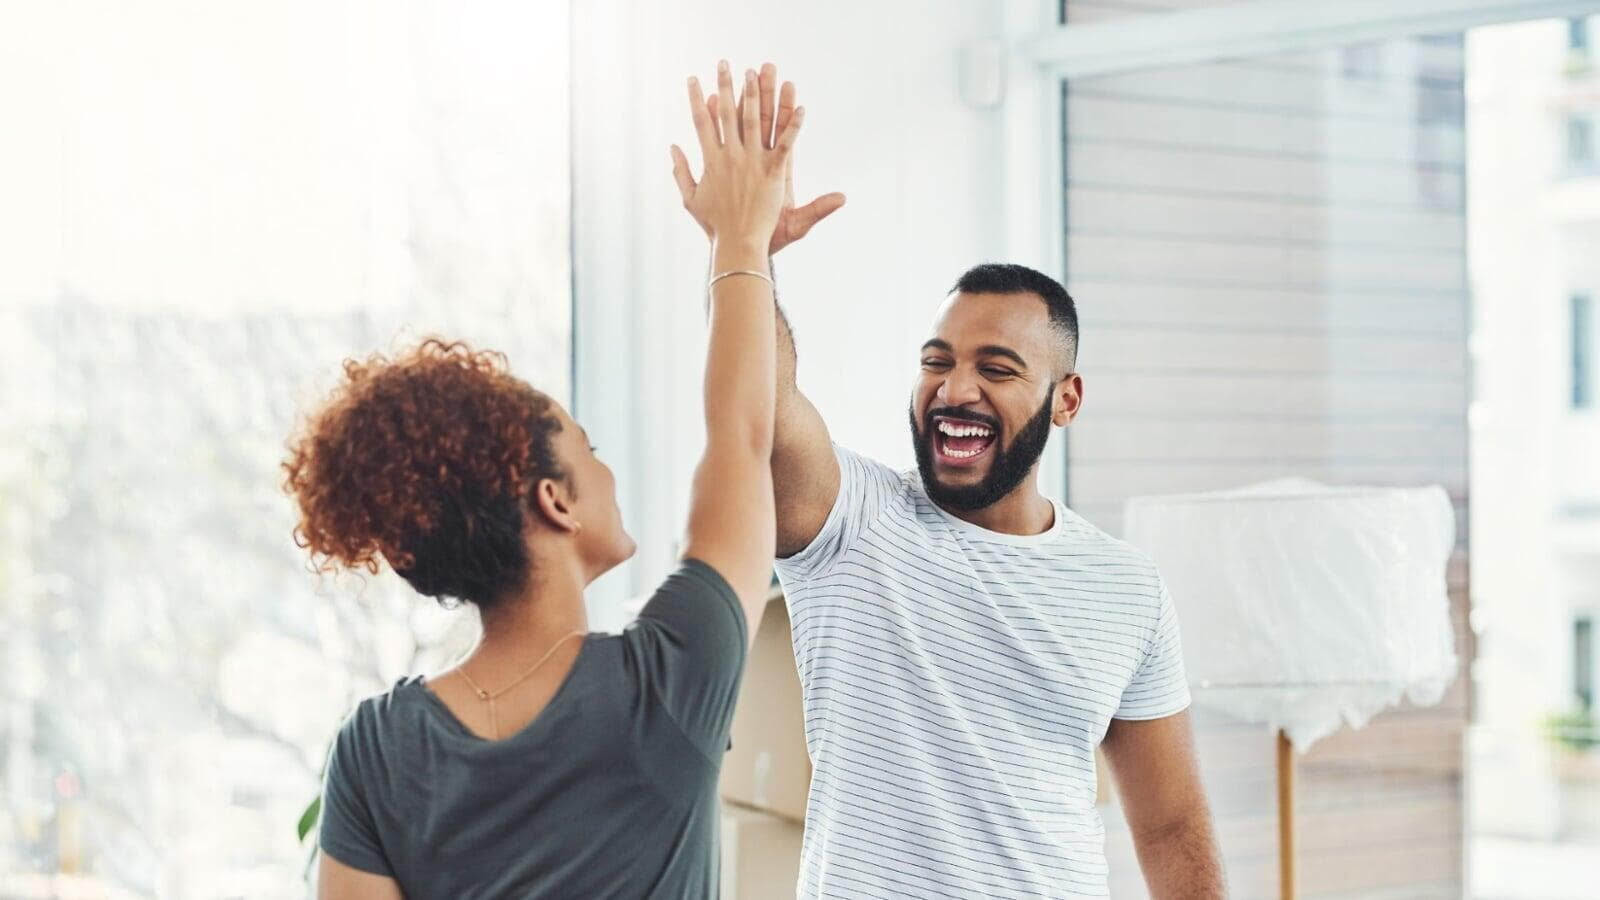 High Five: Finding Joy in Others' Success